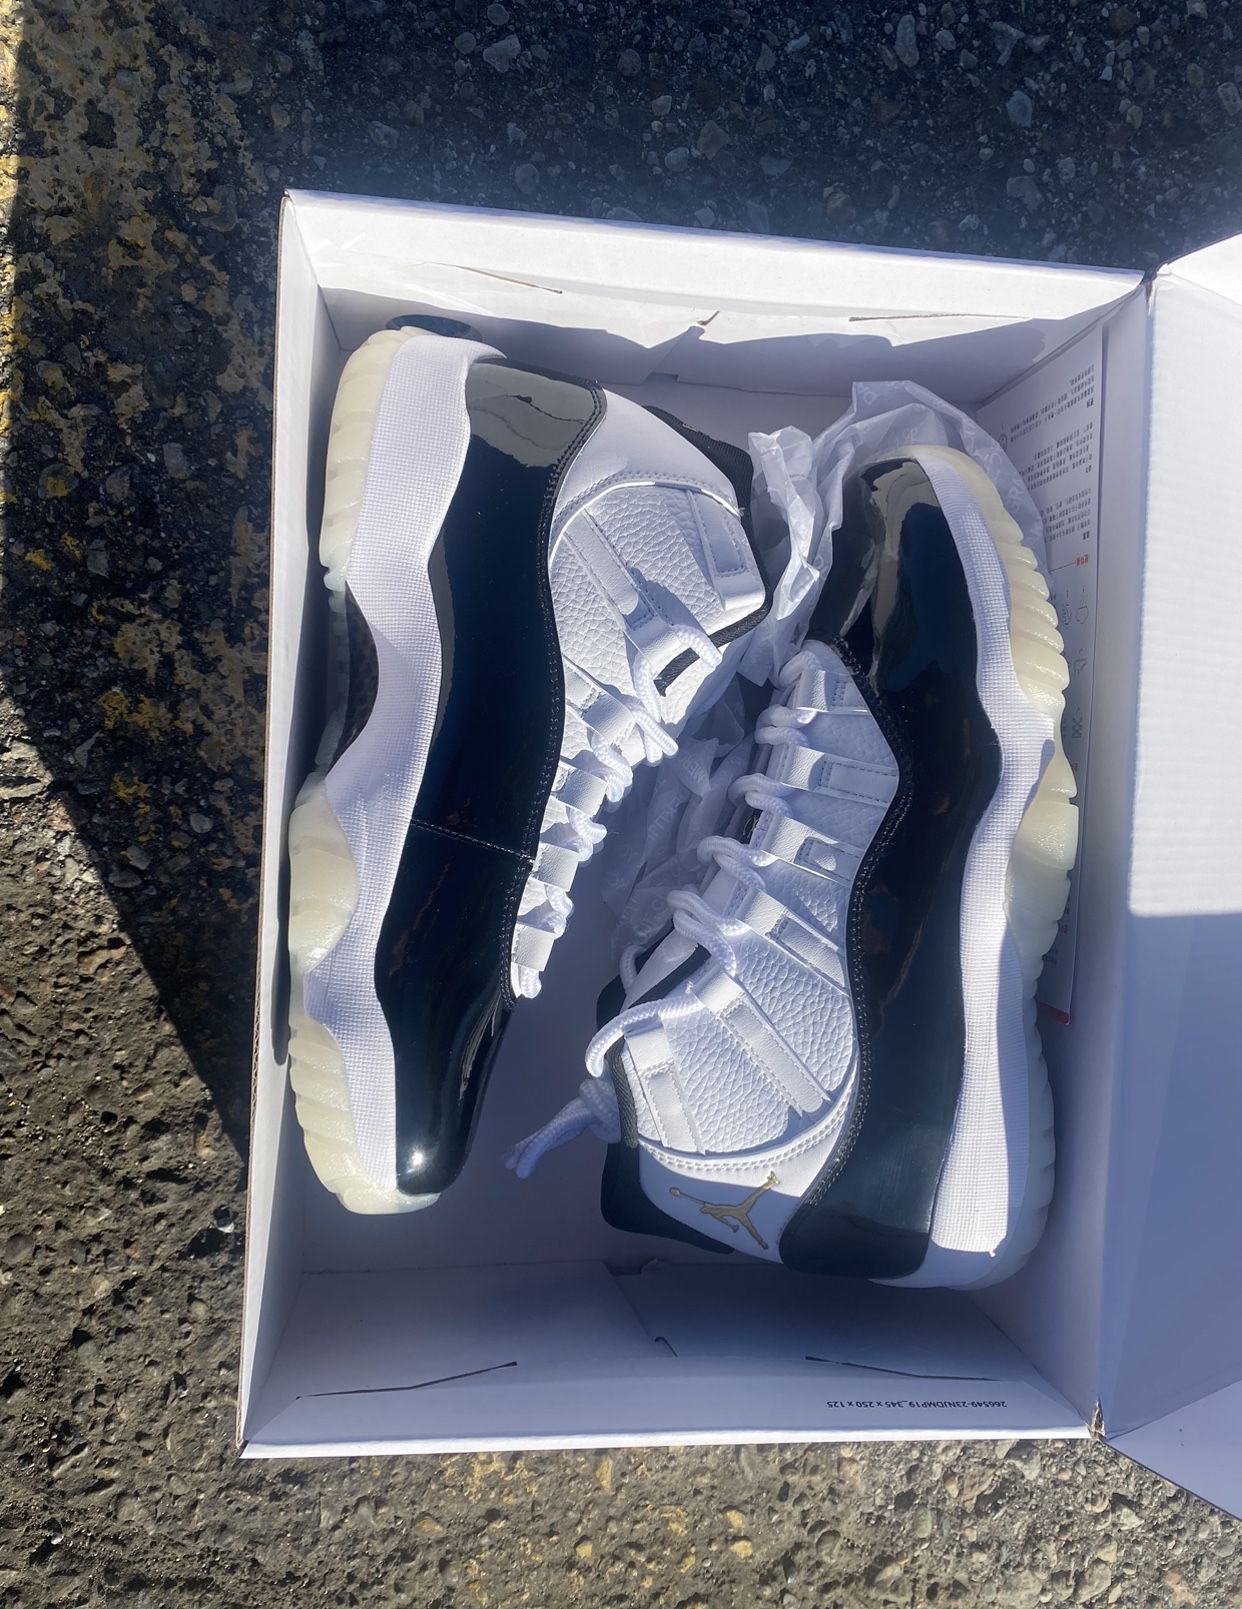 RETRO 11 “DMP” (FREE DELIVERY) SIZE 8&12 ONLY